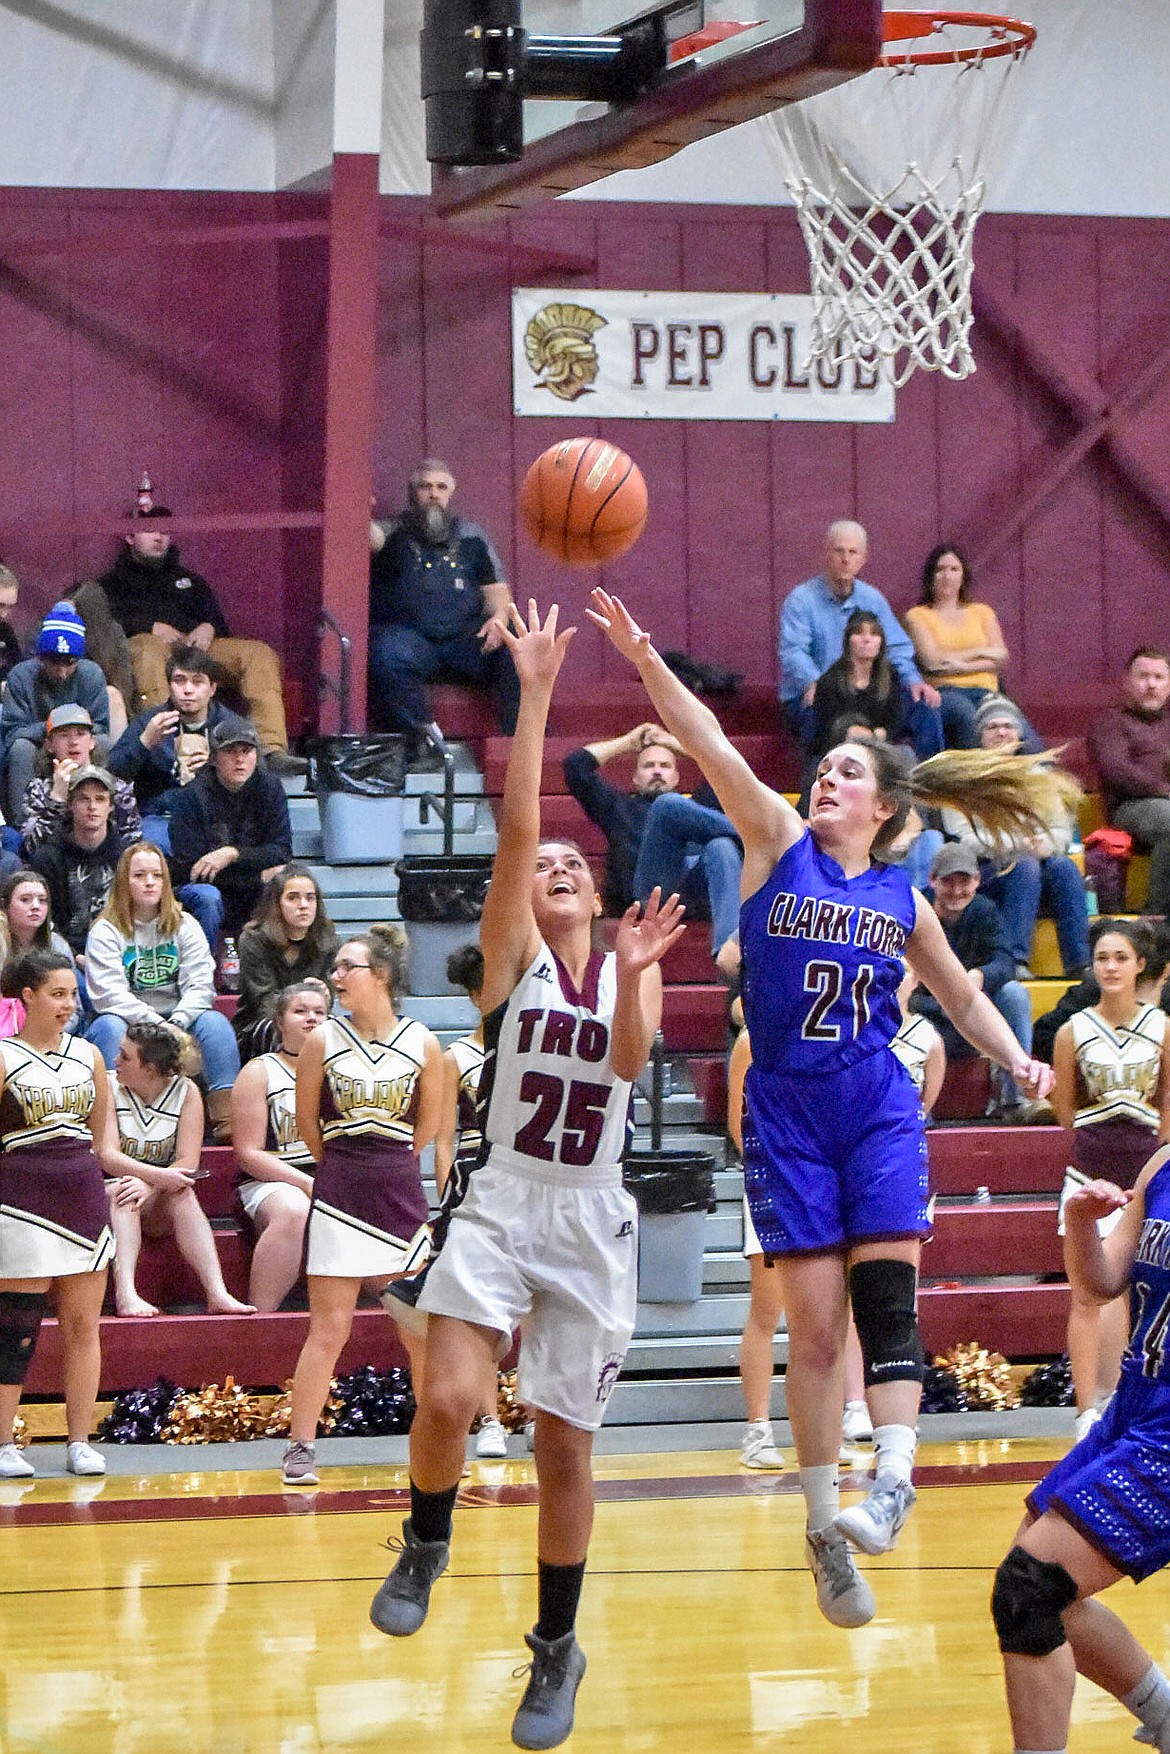 Troy junior Izzy Ramirez, with the Clark Fork defenders barely catching up to her, makes a layup late in the first quarter to make the score 12-8, Troy, late in the first quarter Dec. 3. (Ben Kibbey/The Western News)